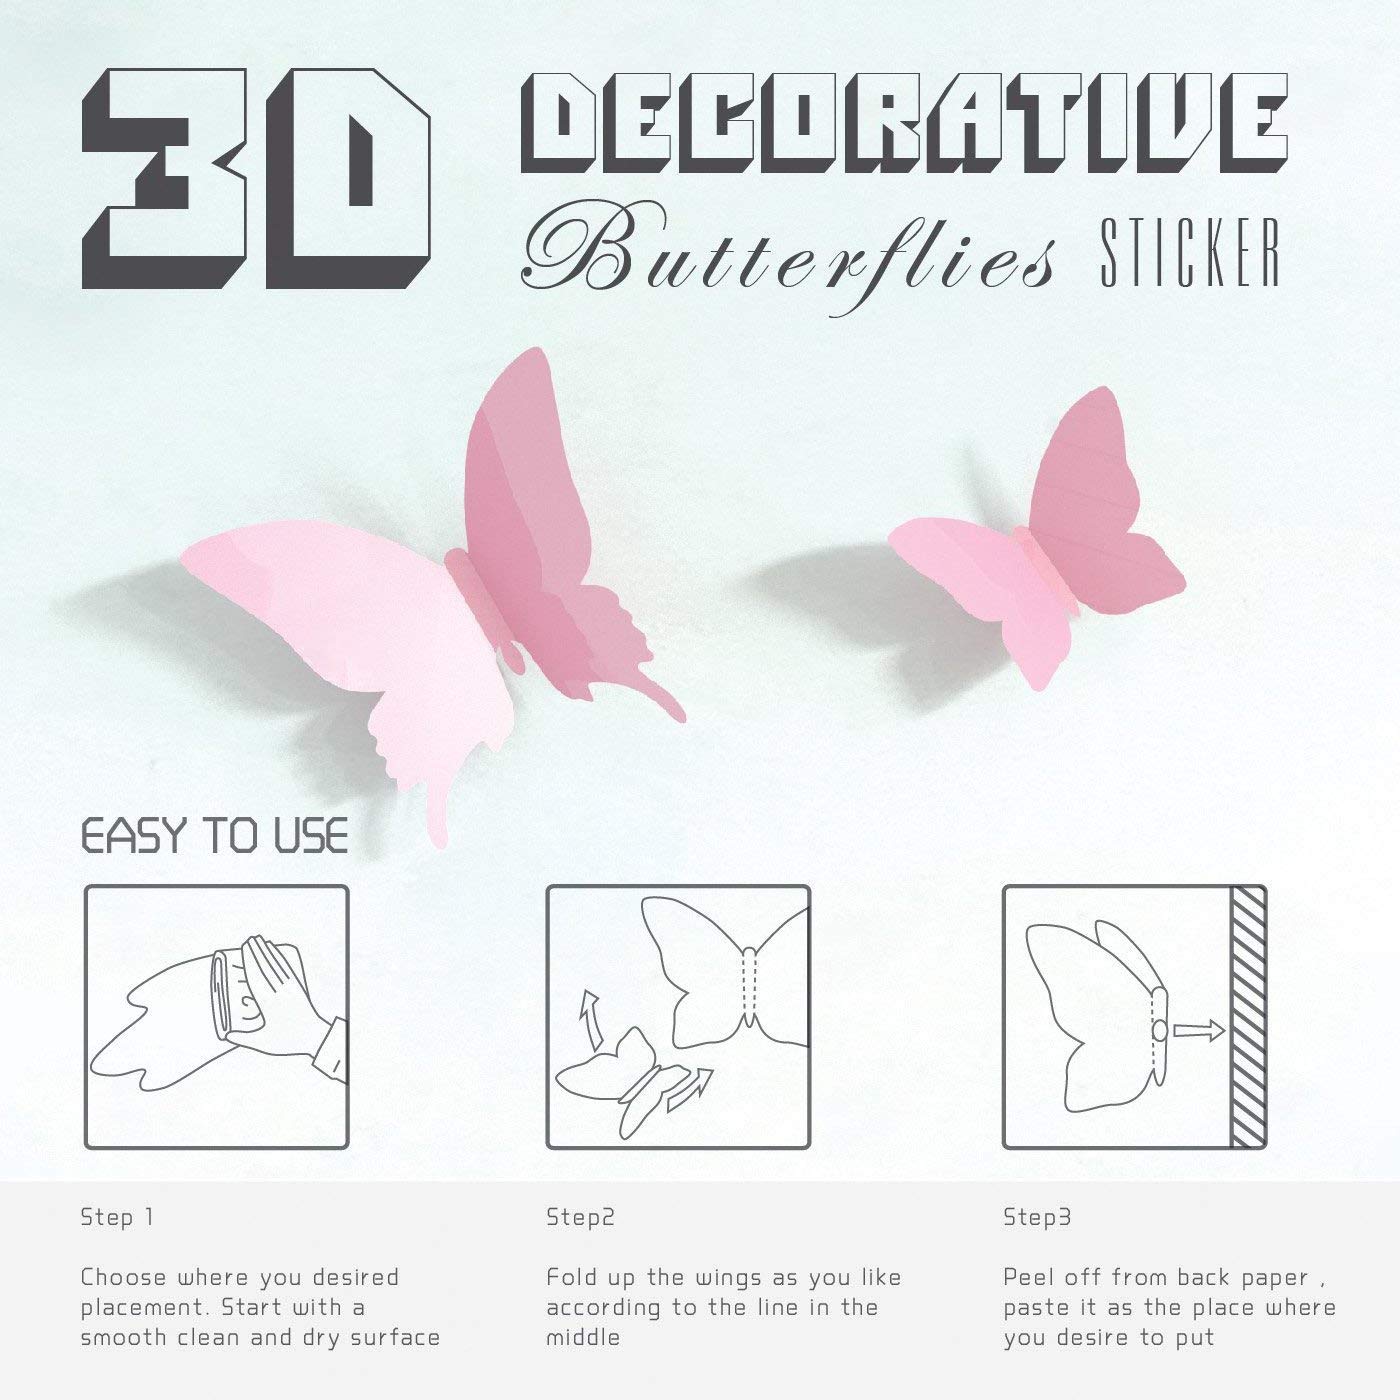 24pcs 3D Butterfly Removable Mural Stickers Wall Stickers Decal for Home and Room Decoration (Pink)